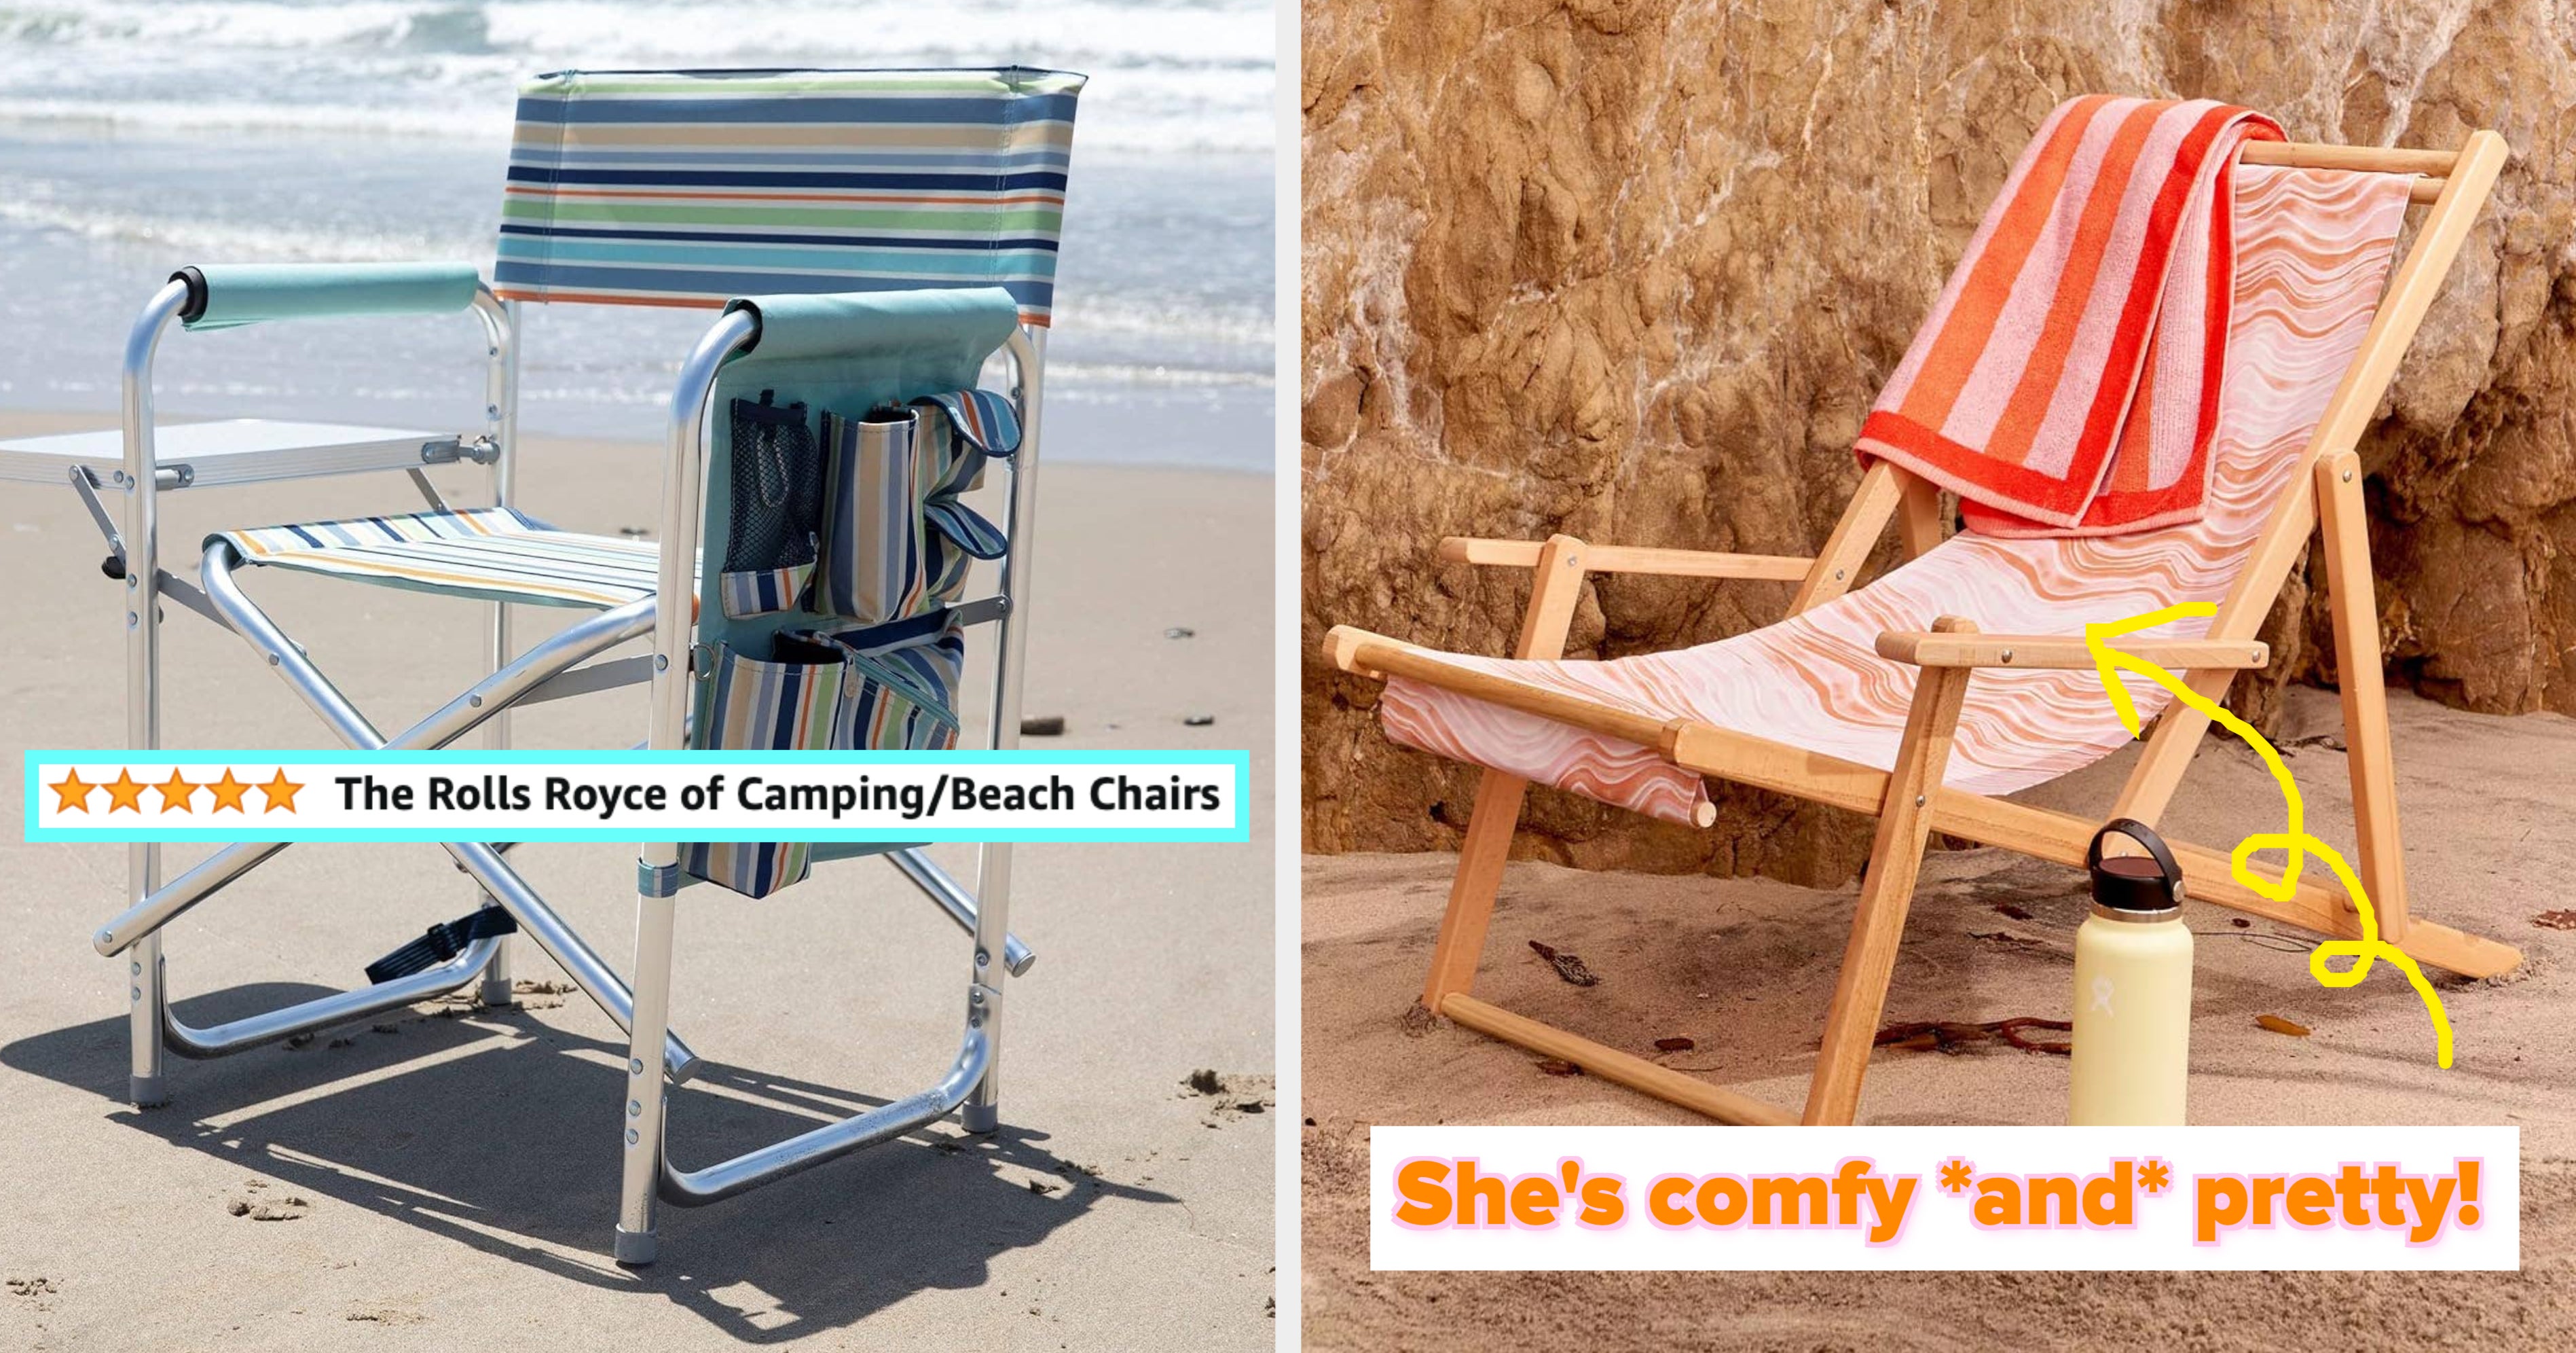 Keepw Outdoor Folding Camping Chair With Back Support Storage Bag Portable Fishing Chair Sketching Beach Travel Chair